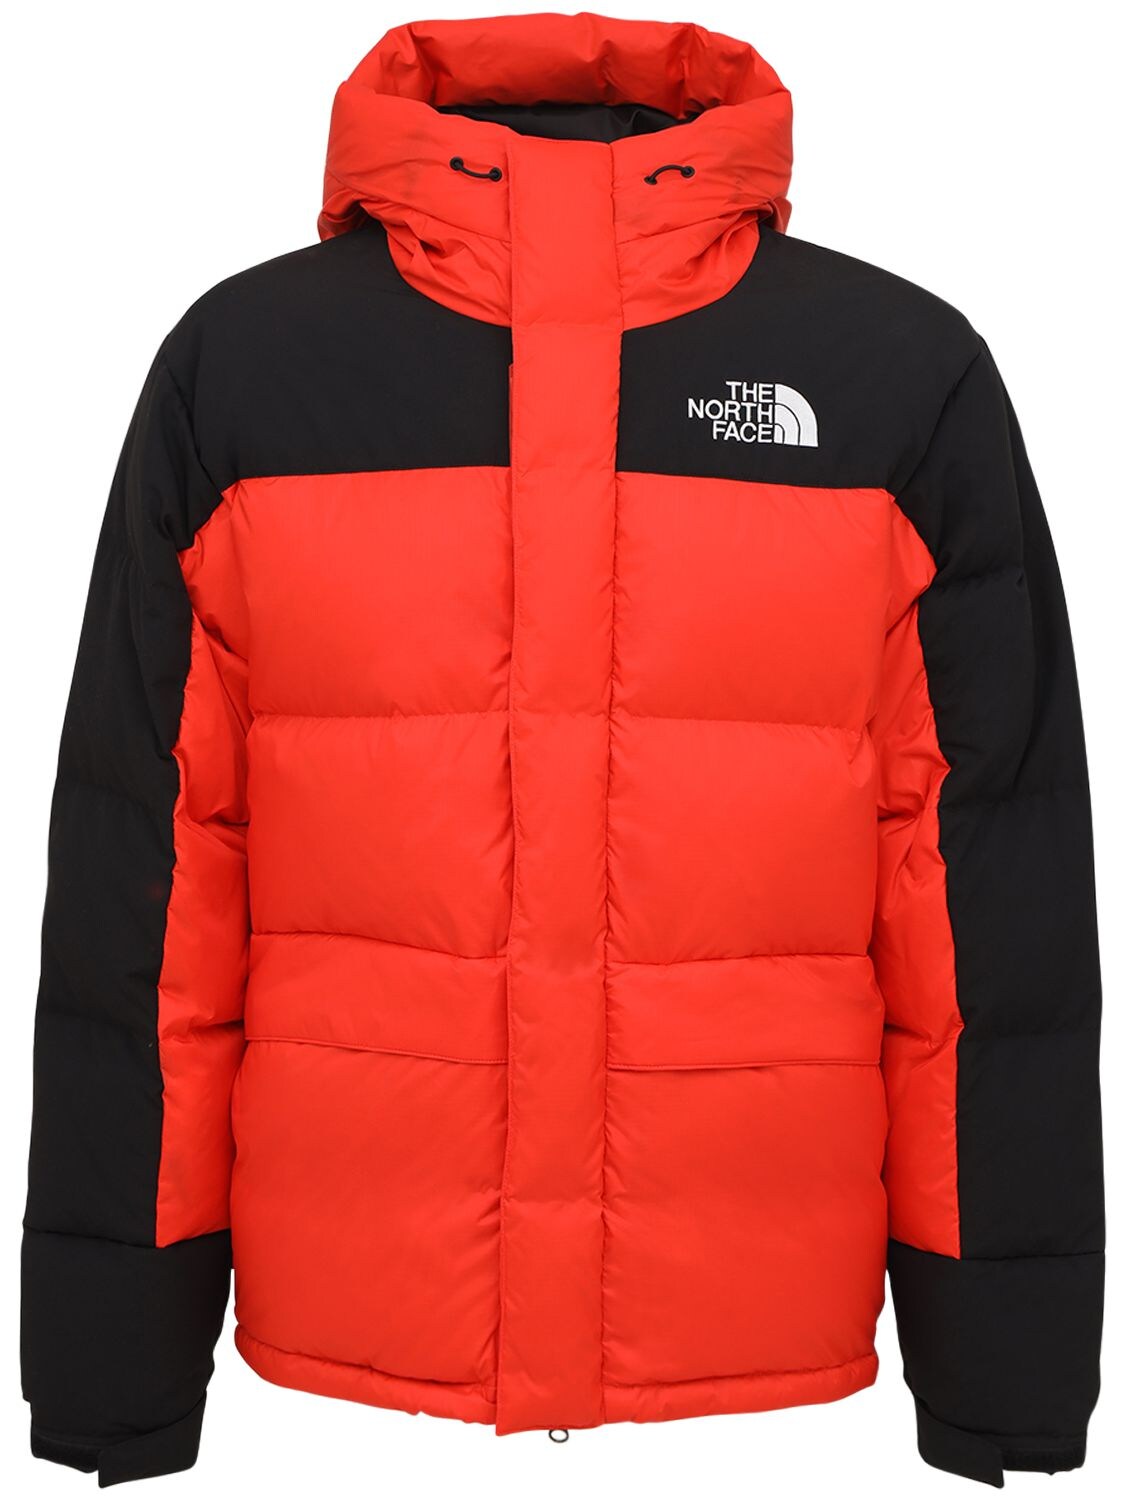 The North Face “himalayan”羽绒派克大衣 In Flare